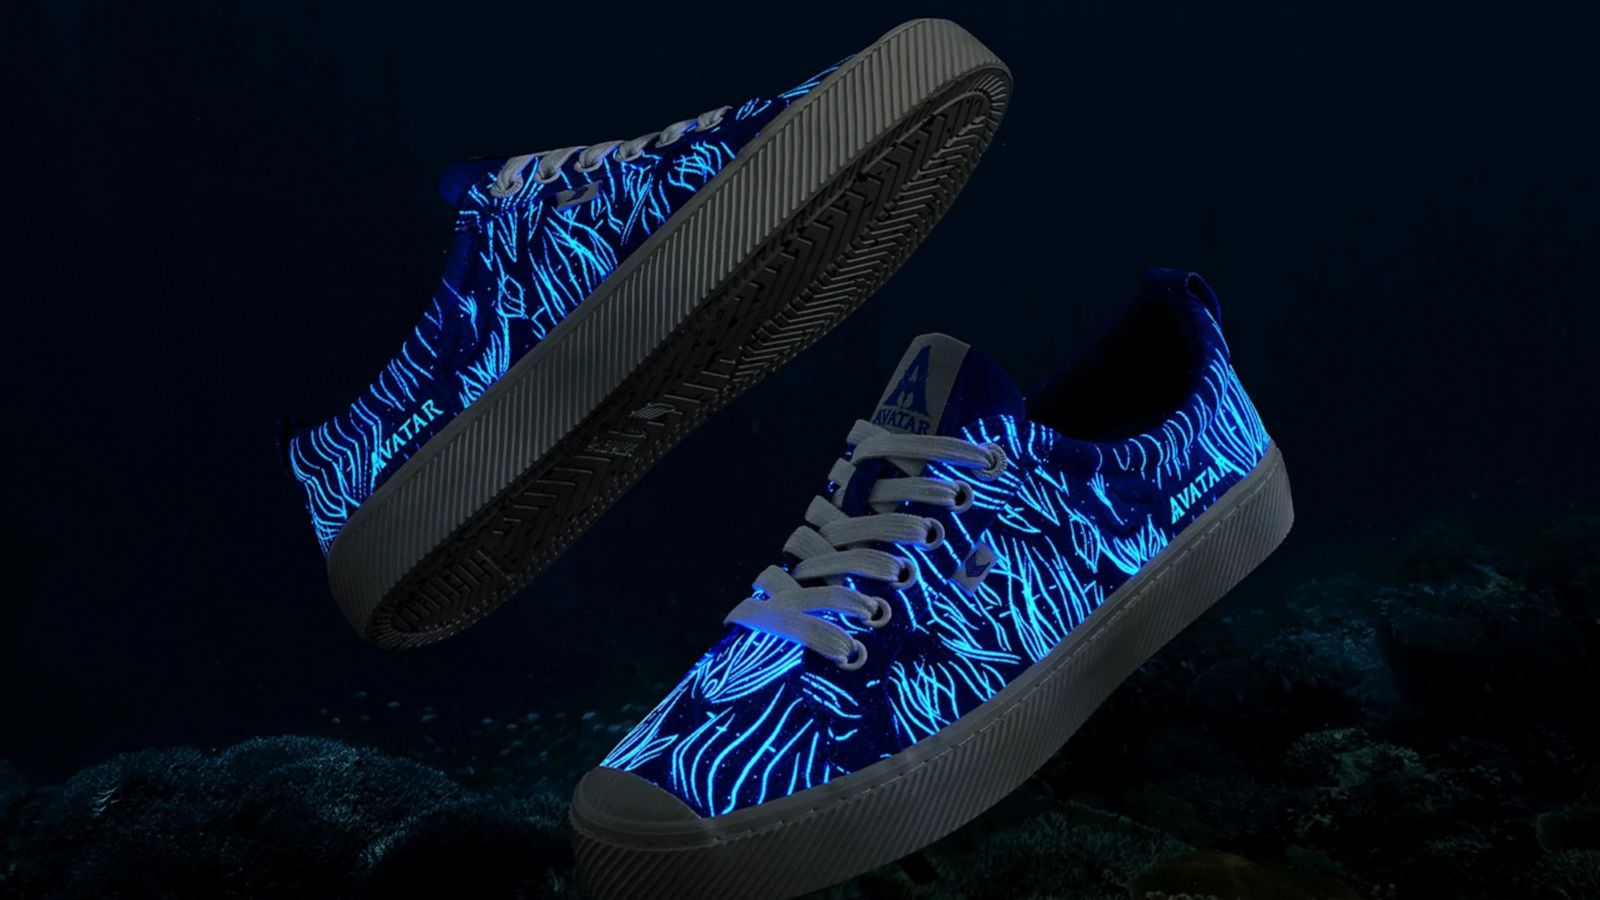 Cariuma's 'Avatar: The Way of Water' sneakers released, glow in the dark -  Good Morning America